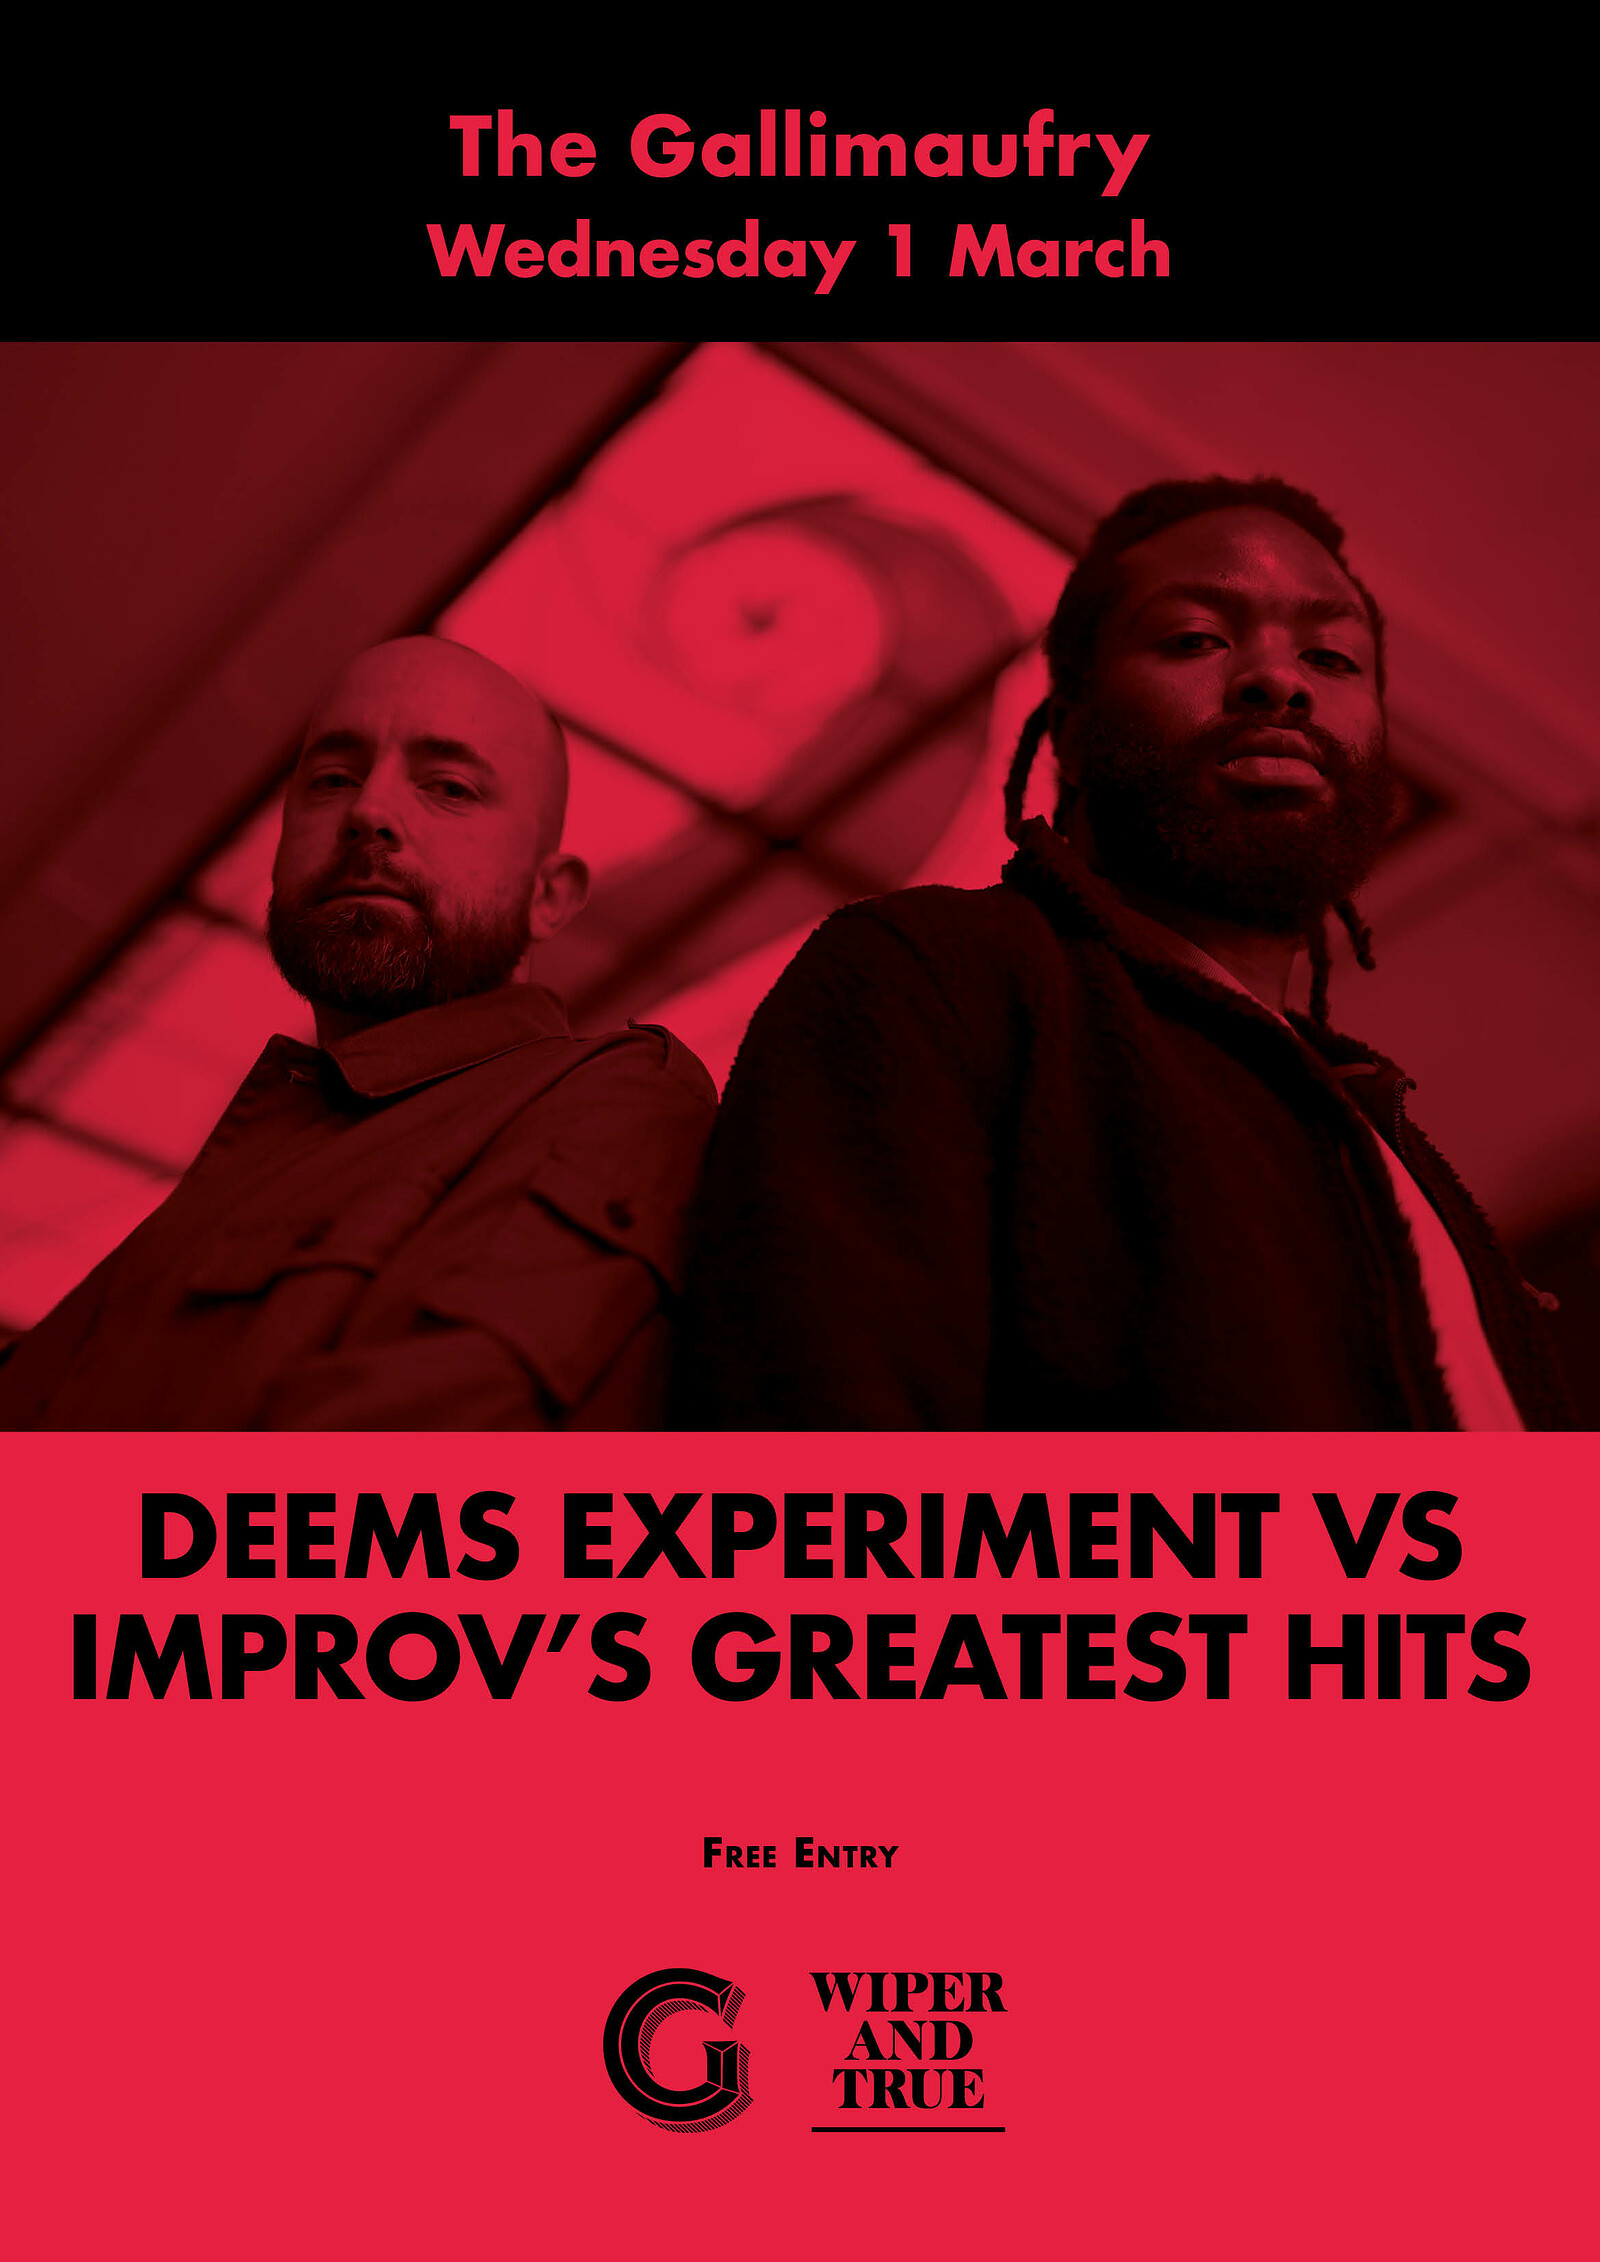 Deems Experiment VS Improv's Greatest Hits at The Gallimaufry